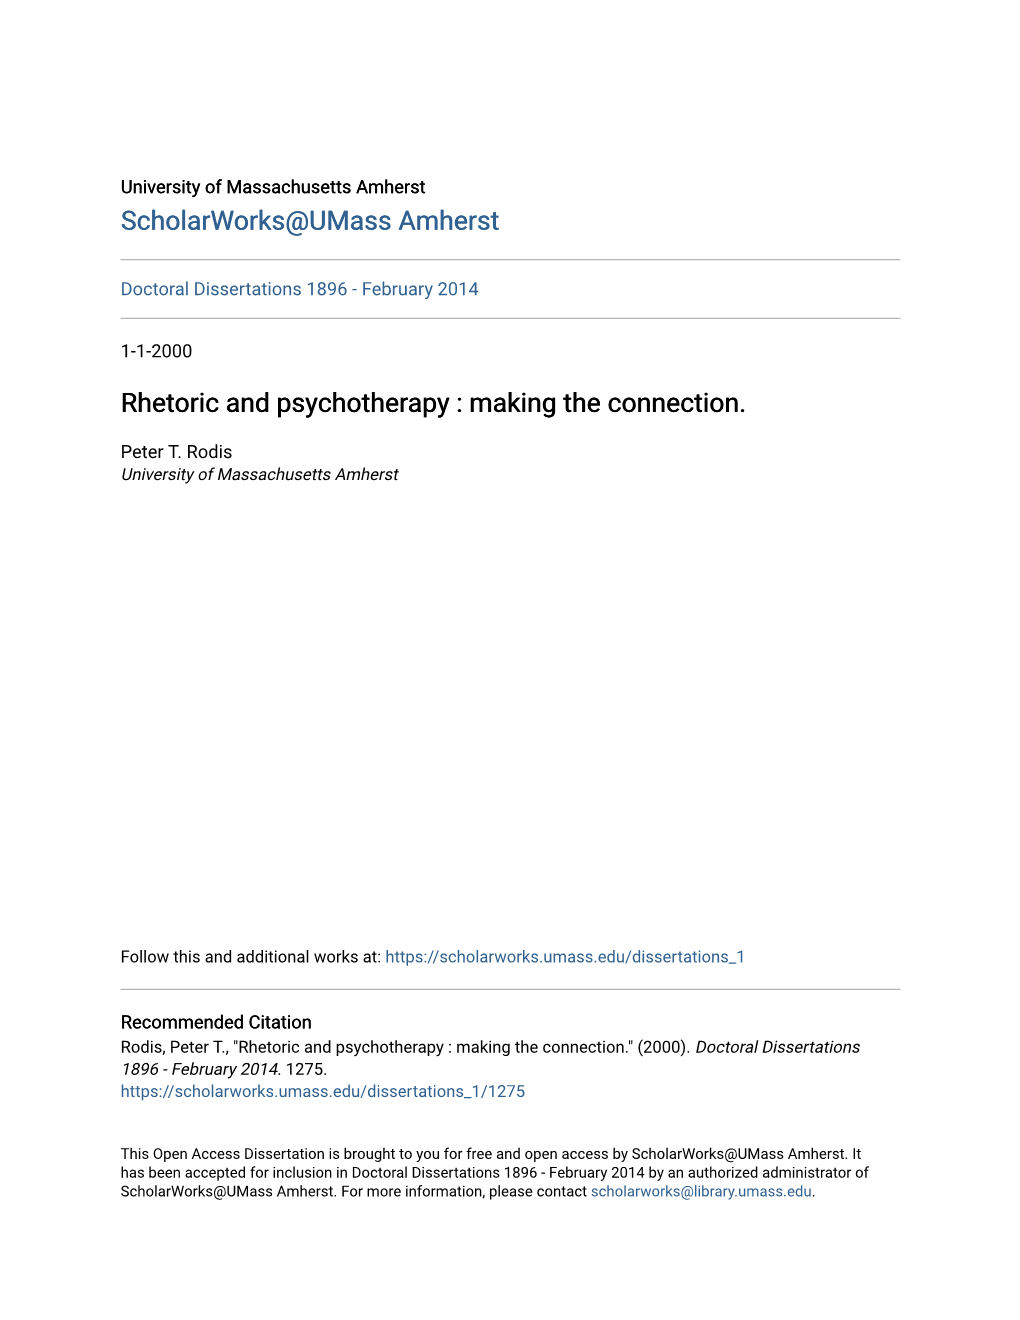 Rhetoric and Psychotherapy : Making the Connection